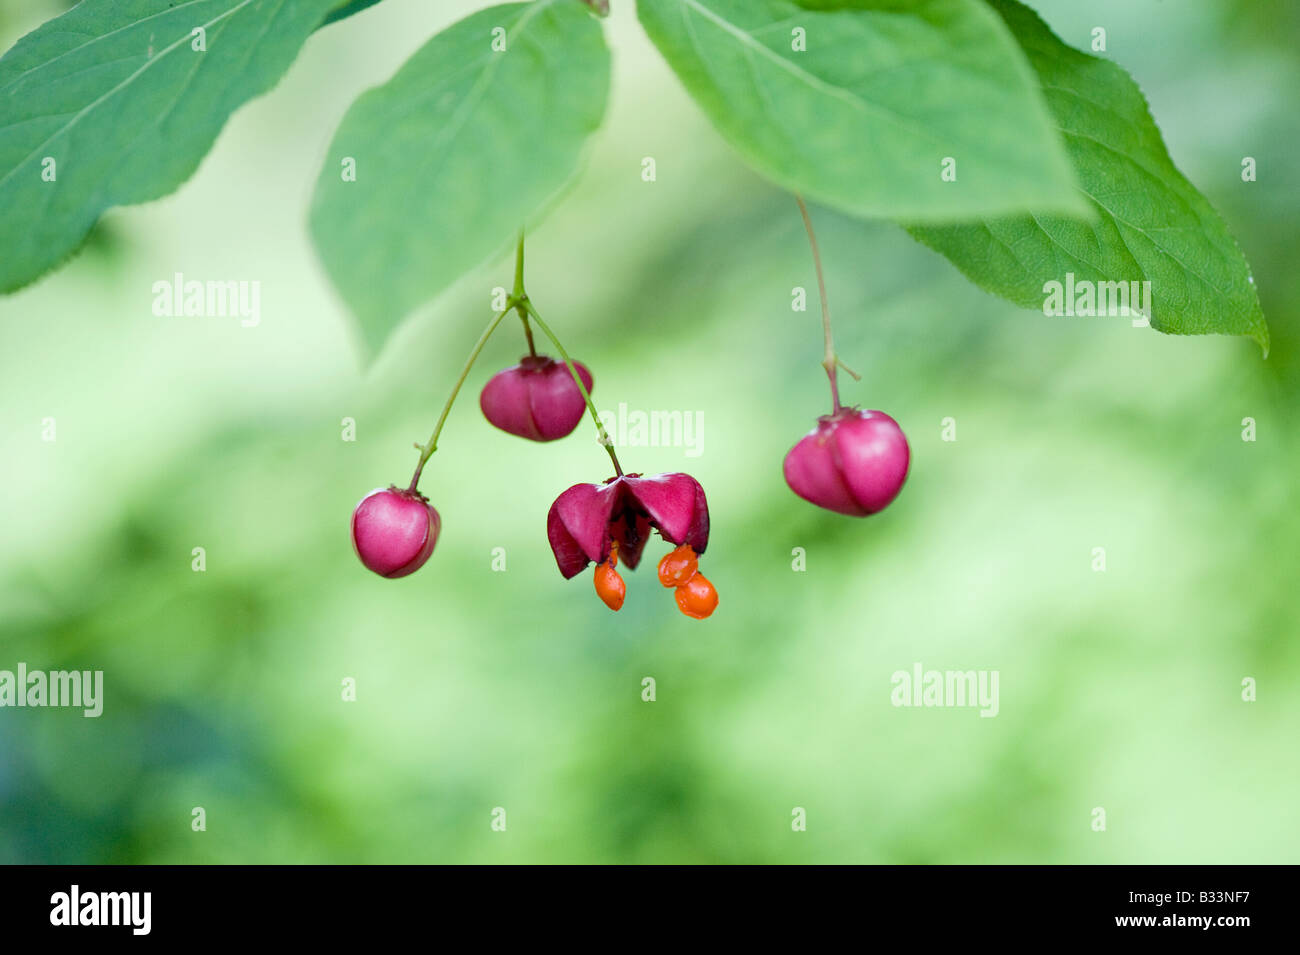 Euonymus sachalinensis. Scarlet Euonymus tree seed pods and seeds. Stock Photo